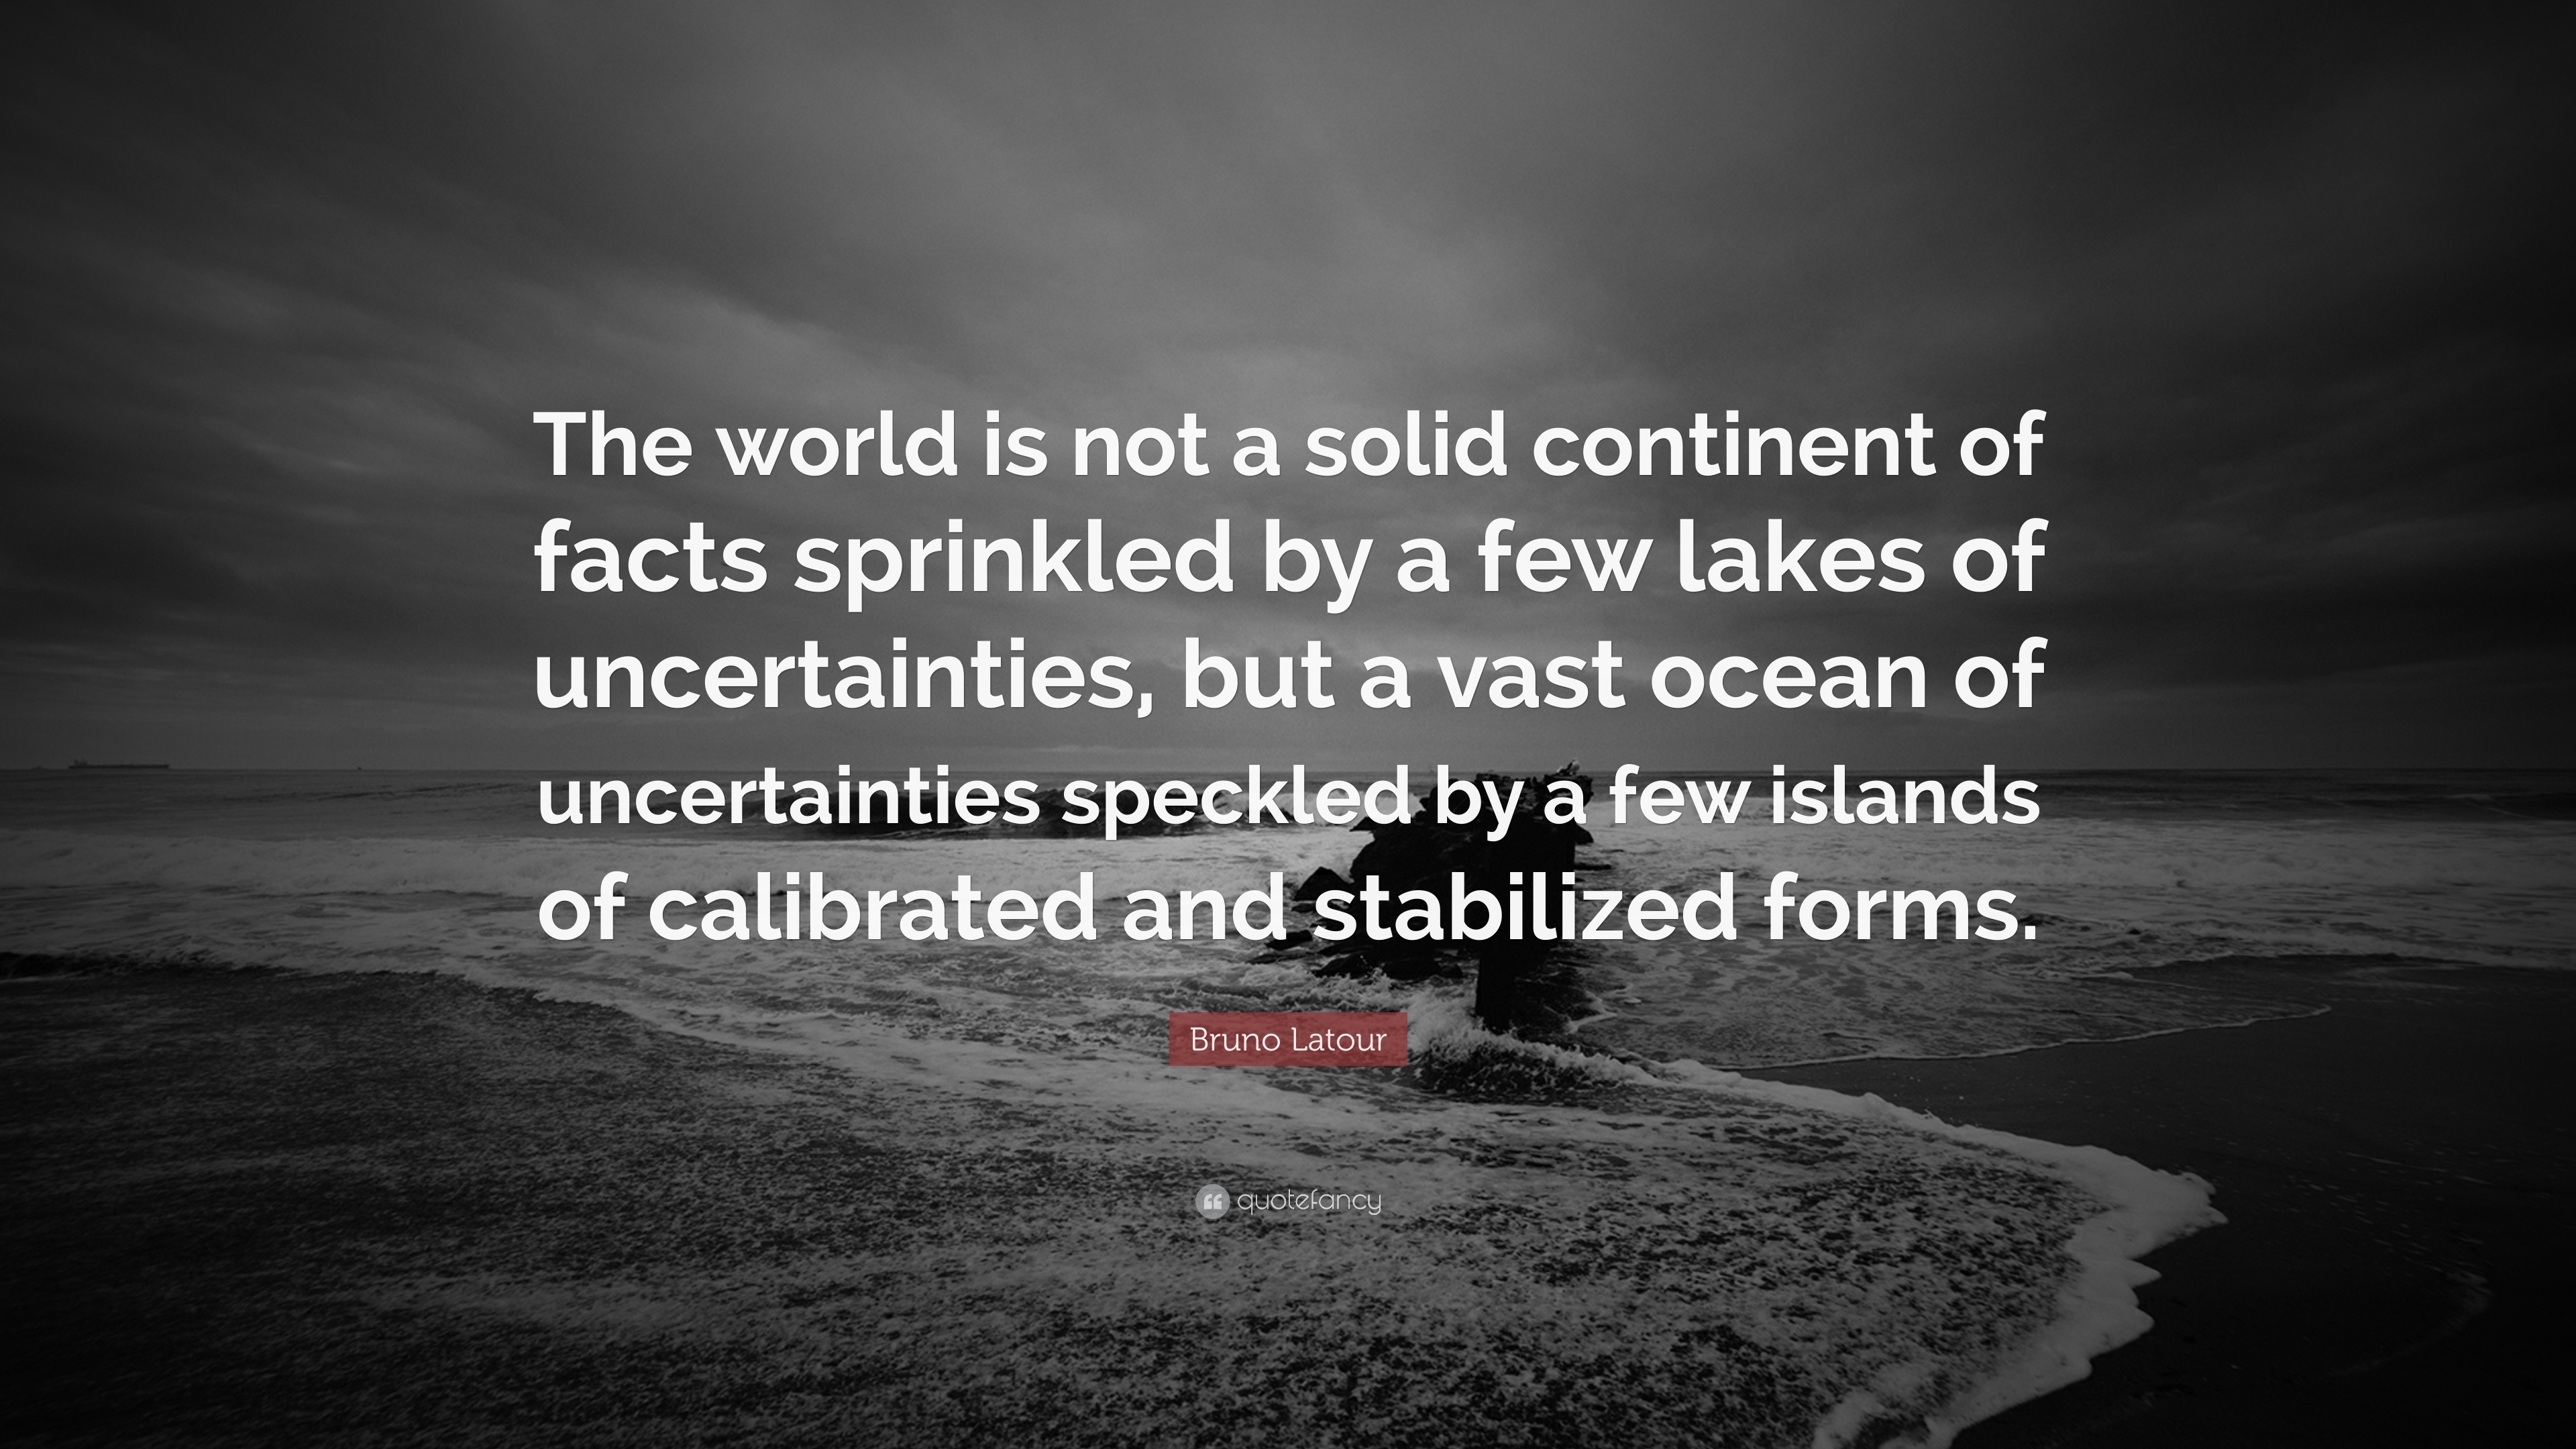 Bruno Latour Quote: “The world is not a solid continent of facts sprinkled  by a few lakes of uncertainties, but a vast ocean of uncertainties...”